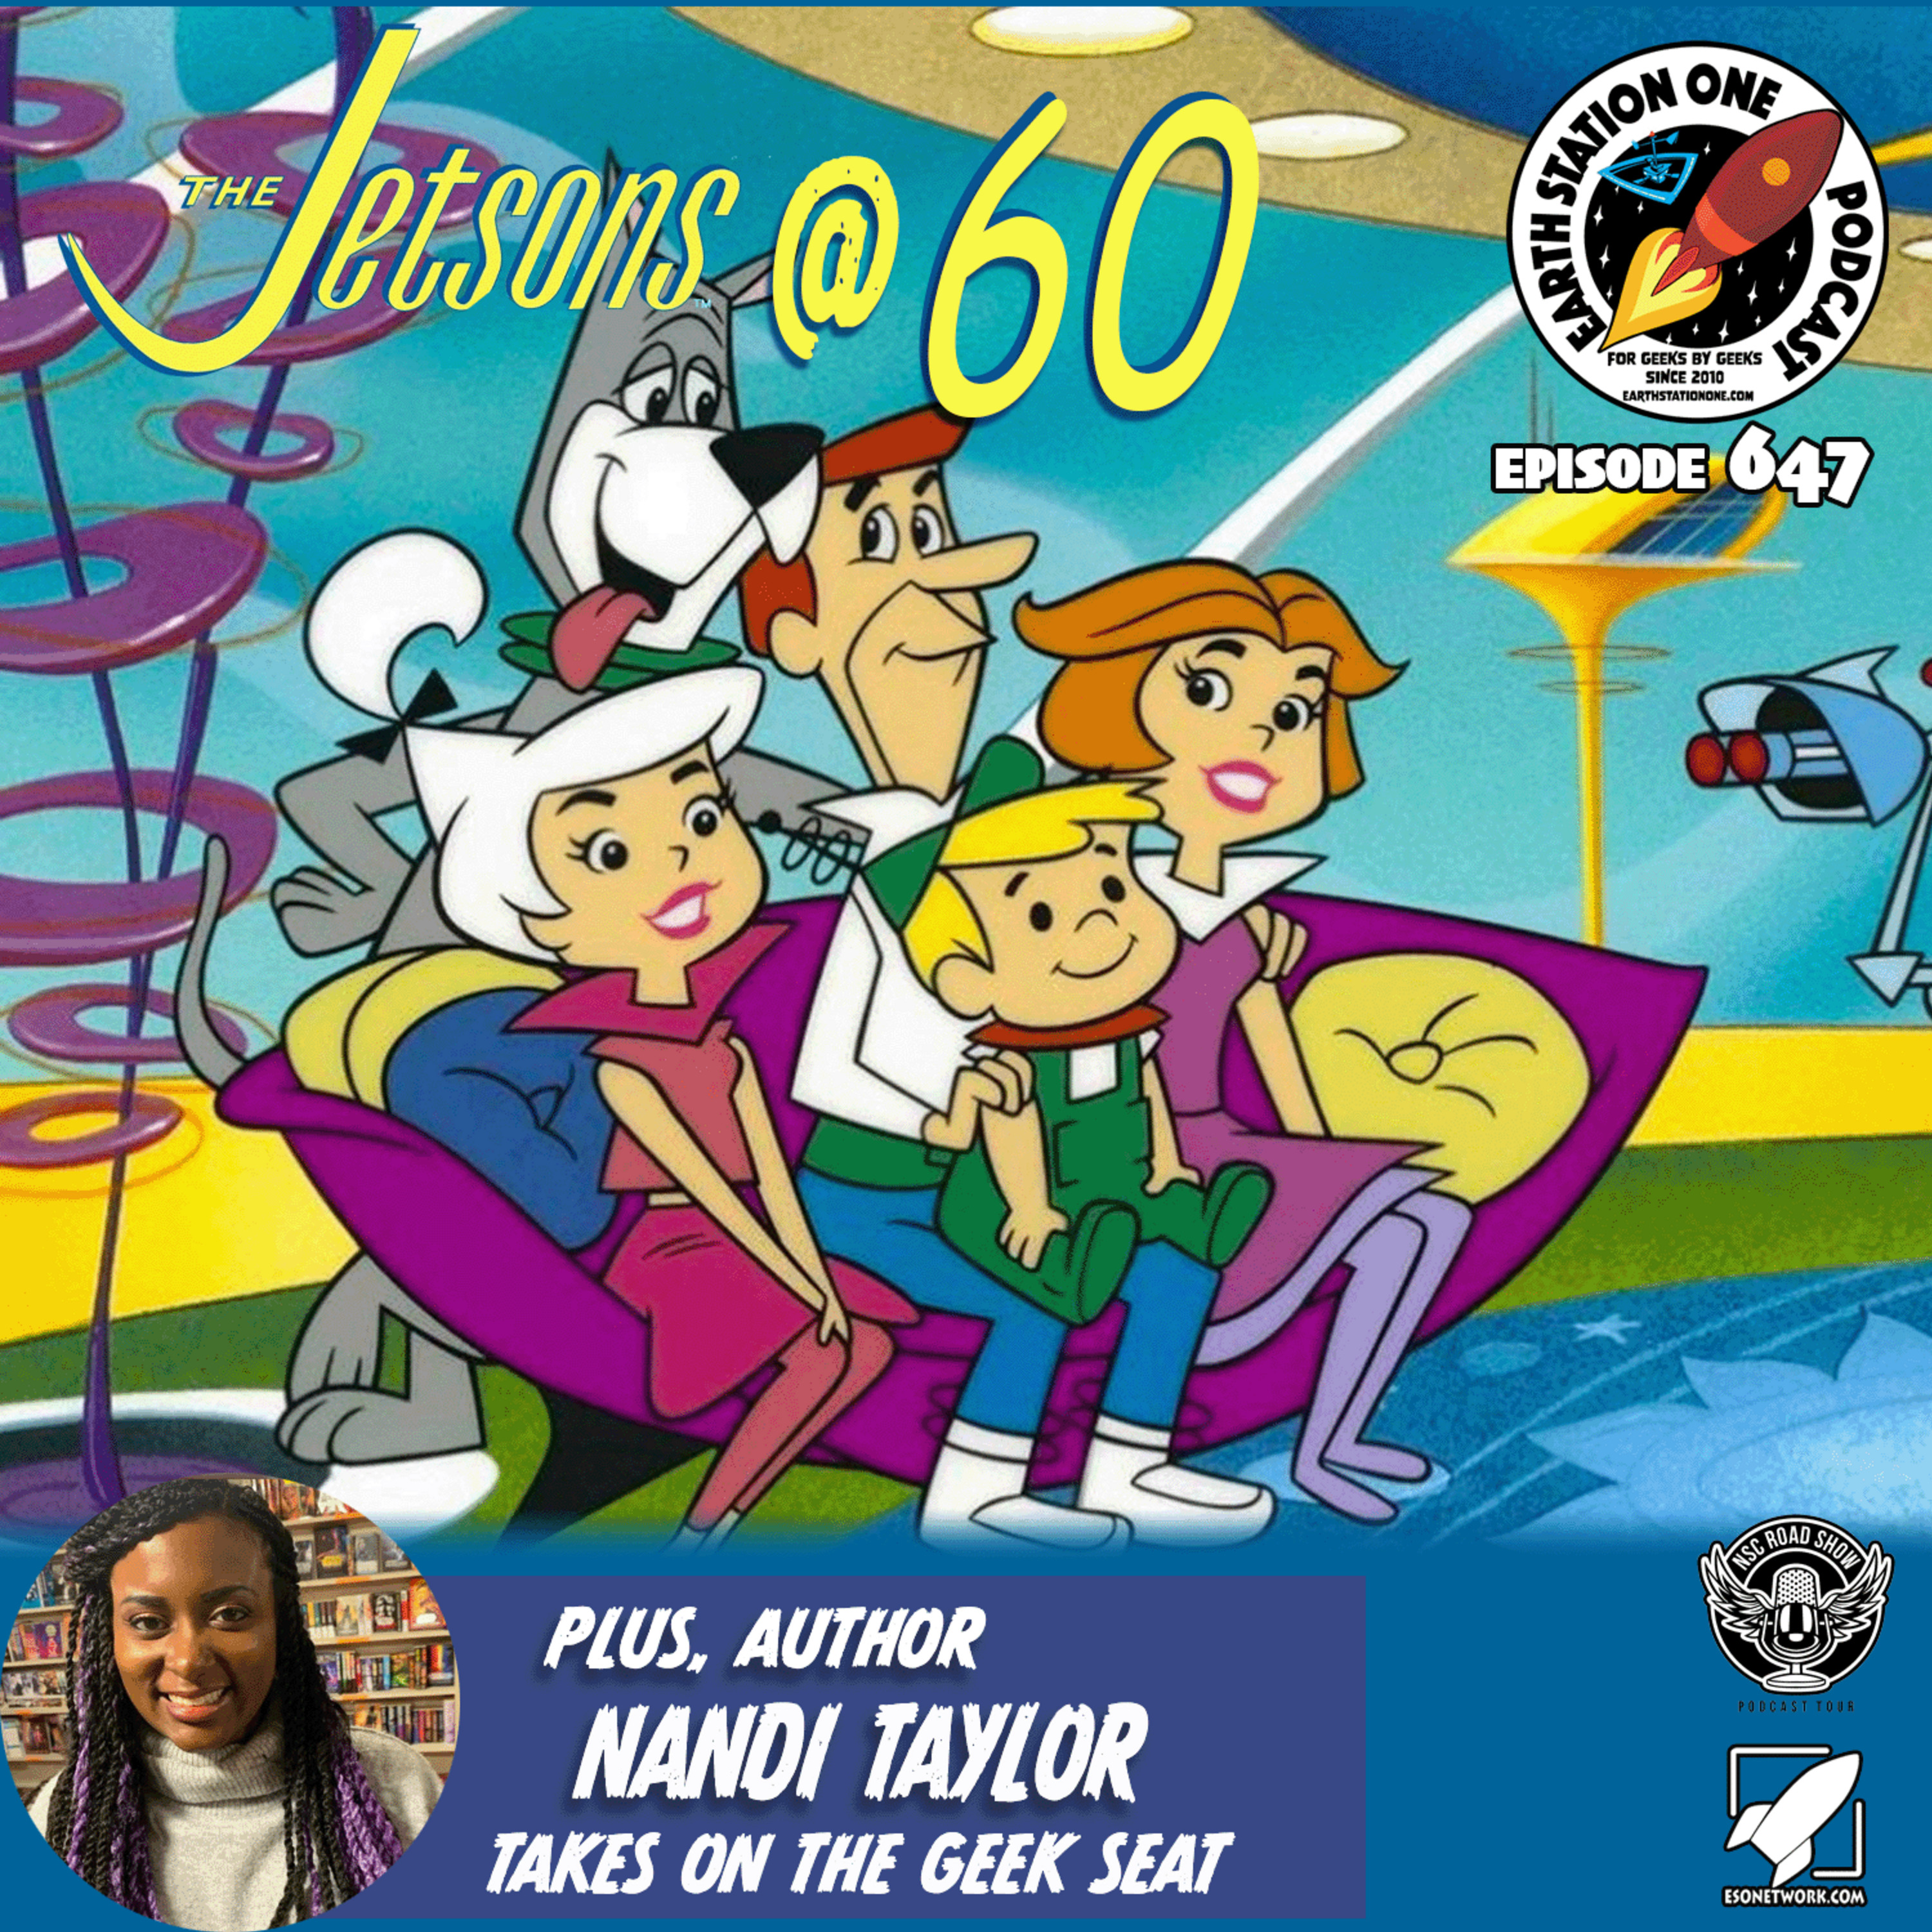 The Earth Station One Podcast - The 60th Anniversary of the Jetsons